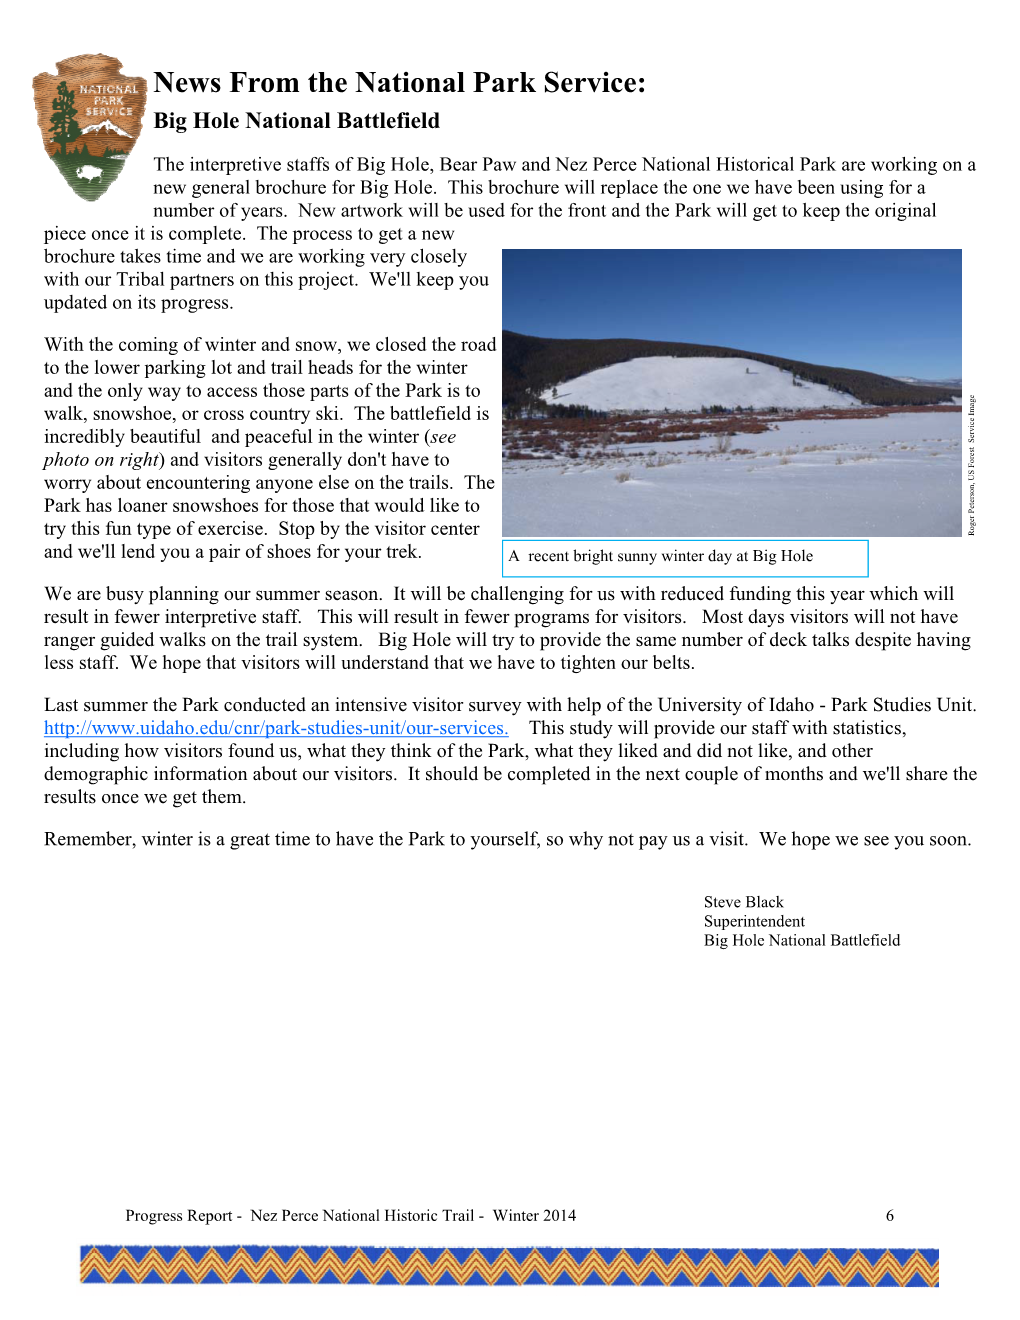 News from the National Park Service